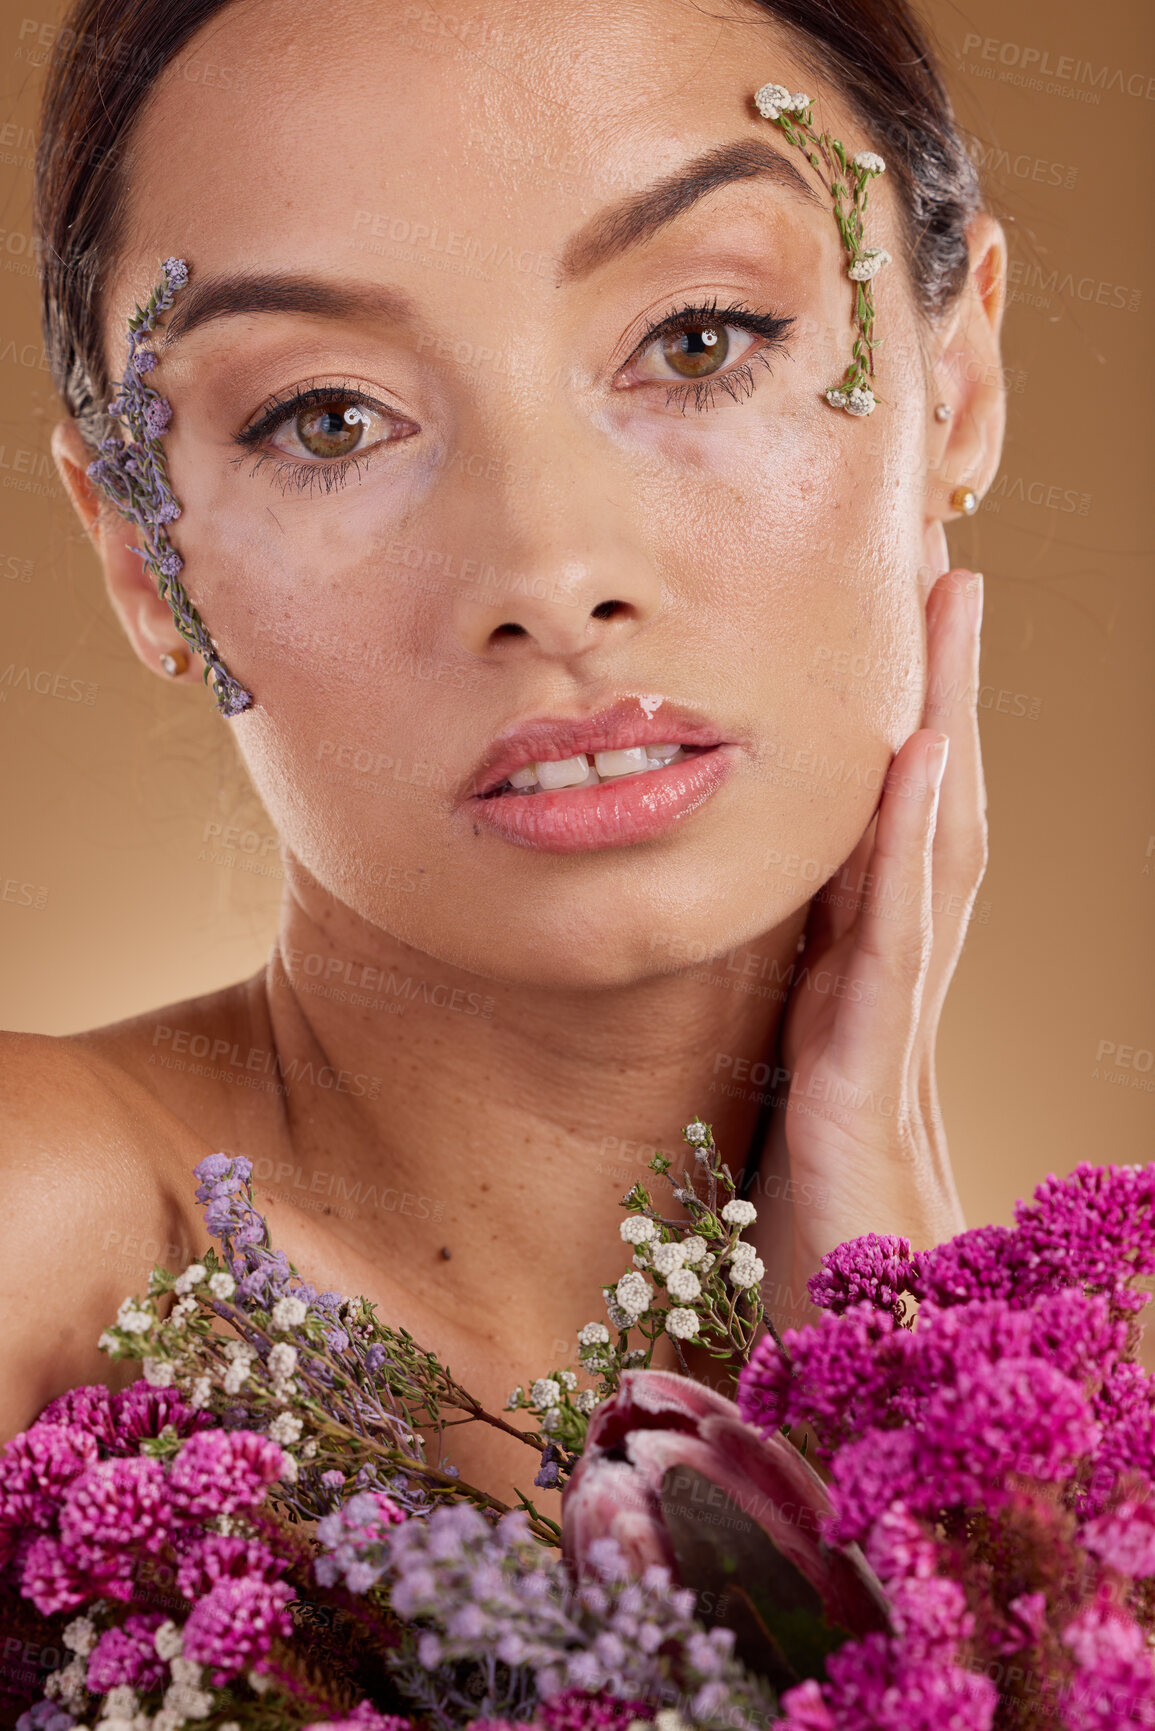 Buy stock photo Floral skincare, flower bouquet and portrait of woman with eco friendly cosmetics, natural facial product or lavender beauty. Dermatology, spa salon and aesthetic model face with sustainable makeup